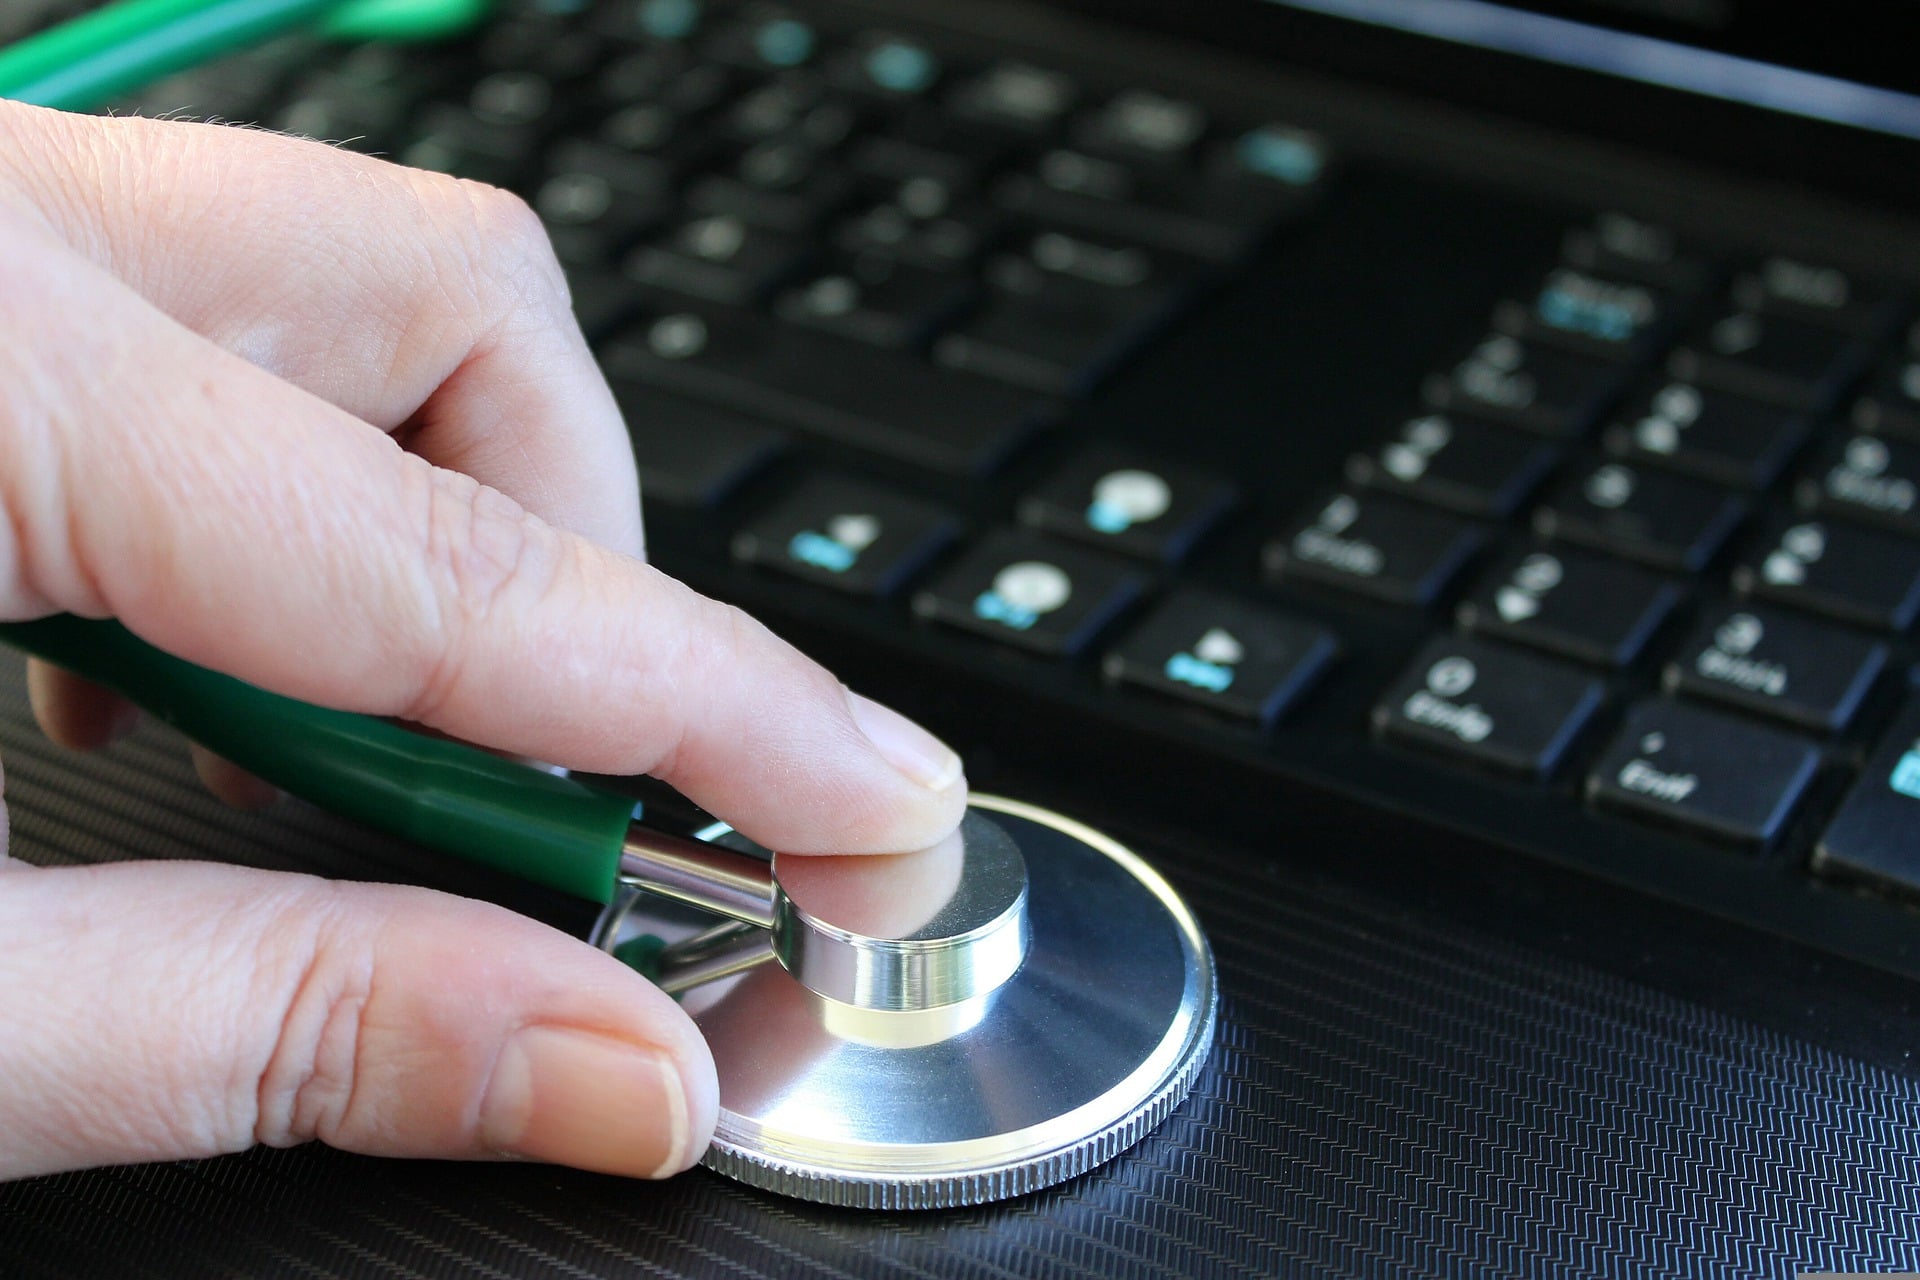 A hand holding the end of a stethoscope in front of a computer keyboard